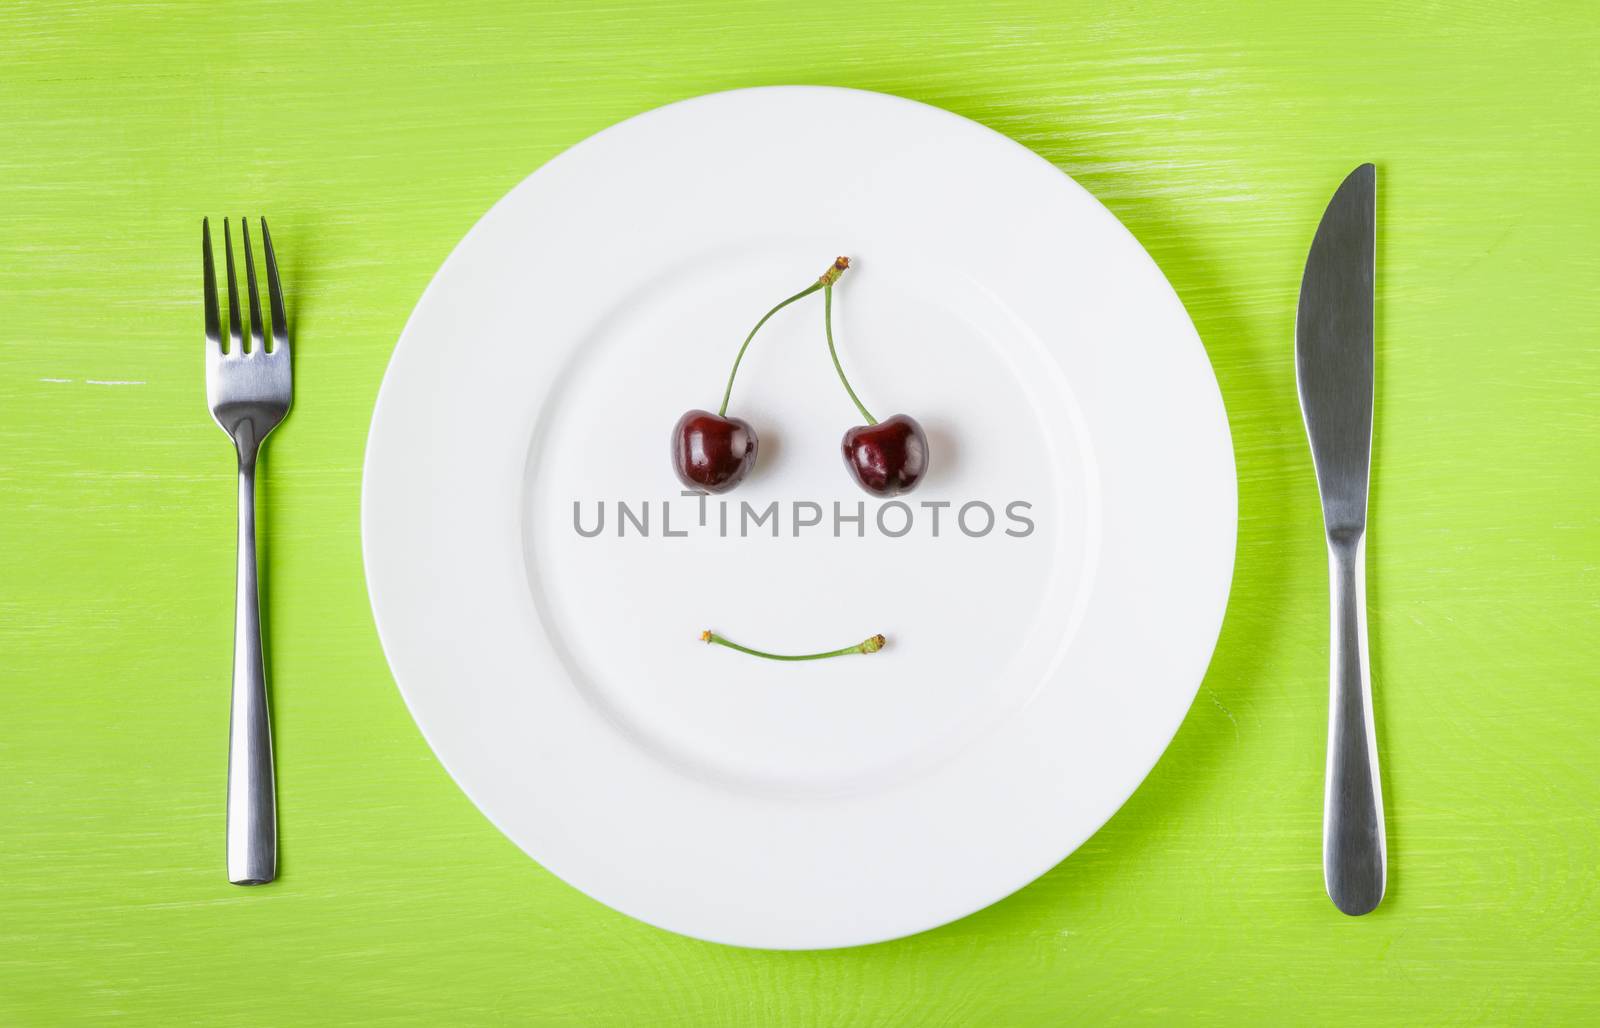 Smiling face of cherries on a white plate, knife and fork on a bright green table. The concept of a raw food diet, vegetarian, healthy eating, diet, weight loss, good mood